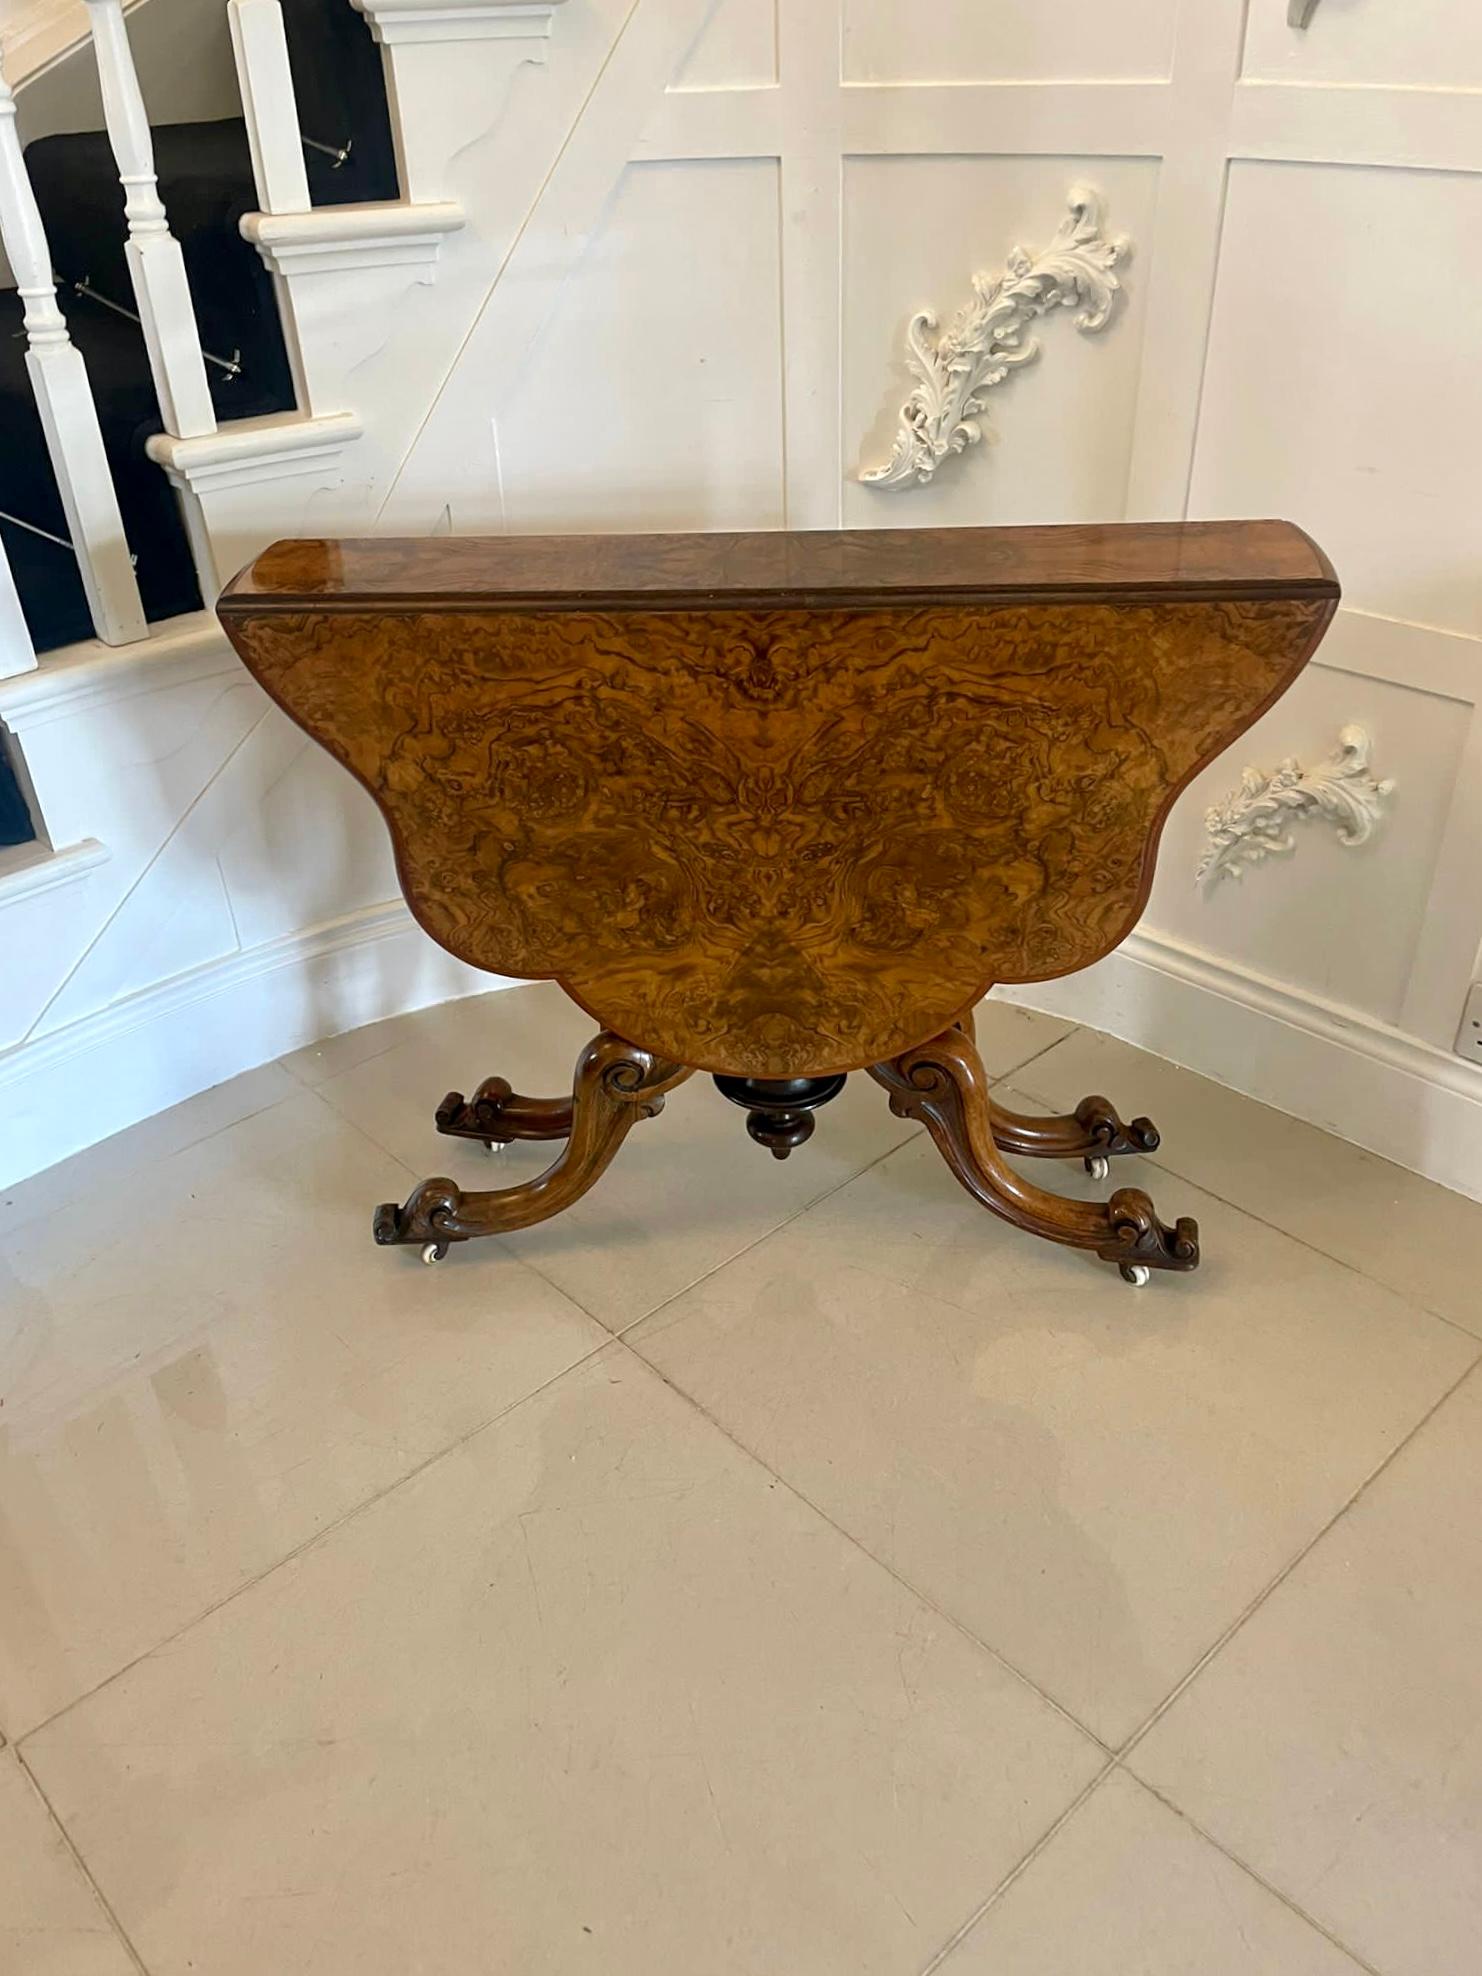 Superb quality antique Victorian burr walnut Sutherland table having a magnificent quality serpentine shaped burr walnut top with two drop leaves and a moulded edge standing on swing out shaped carved solid walnut cabriole legs with scroll feet on